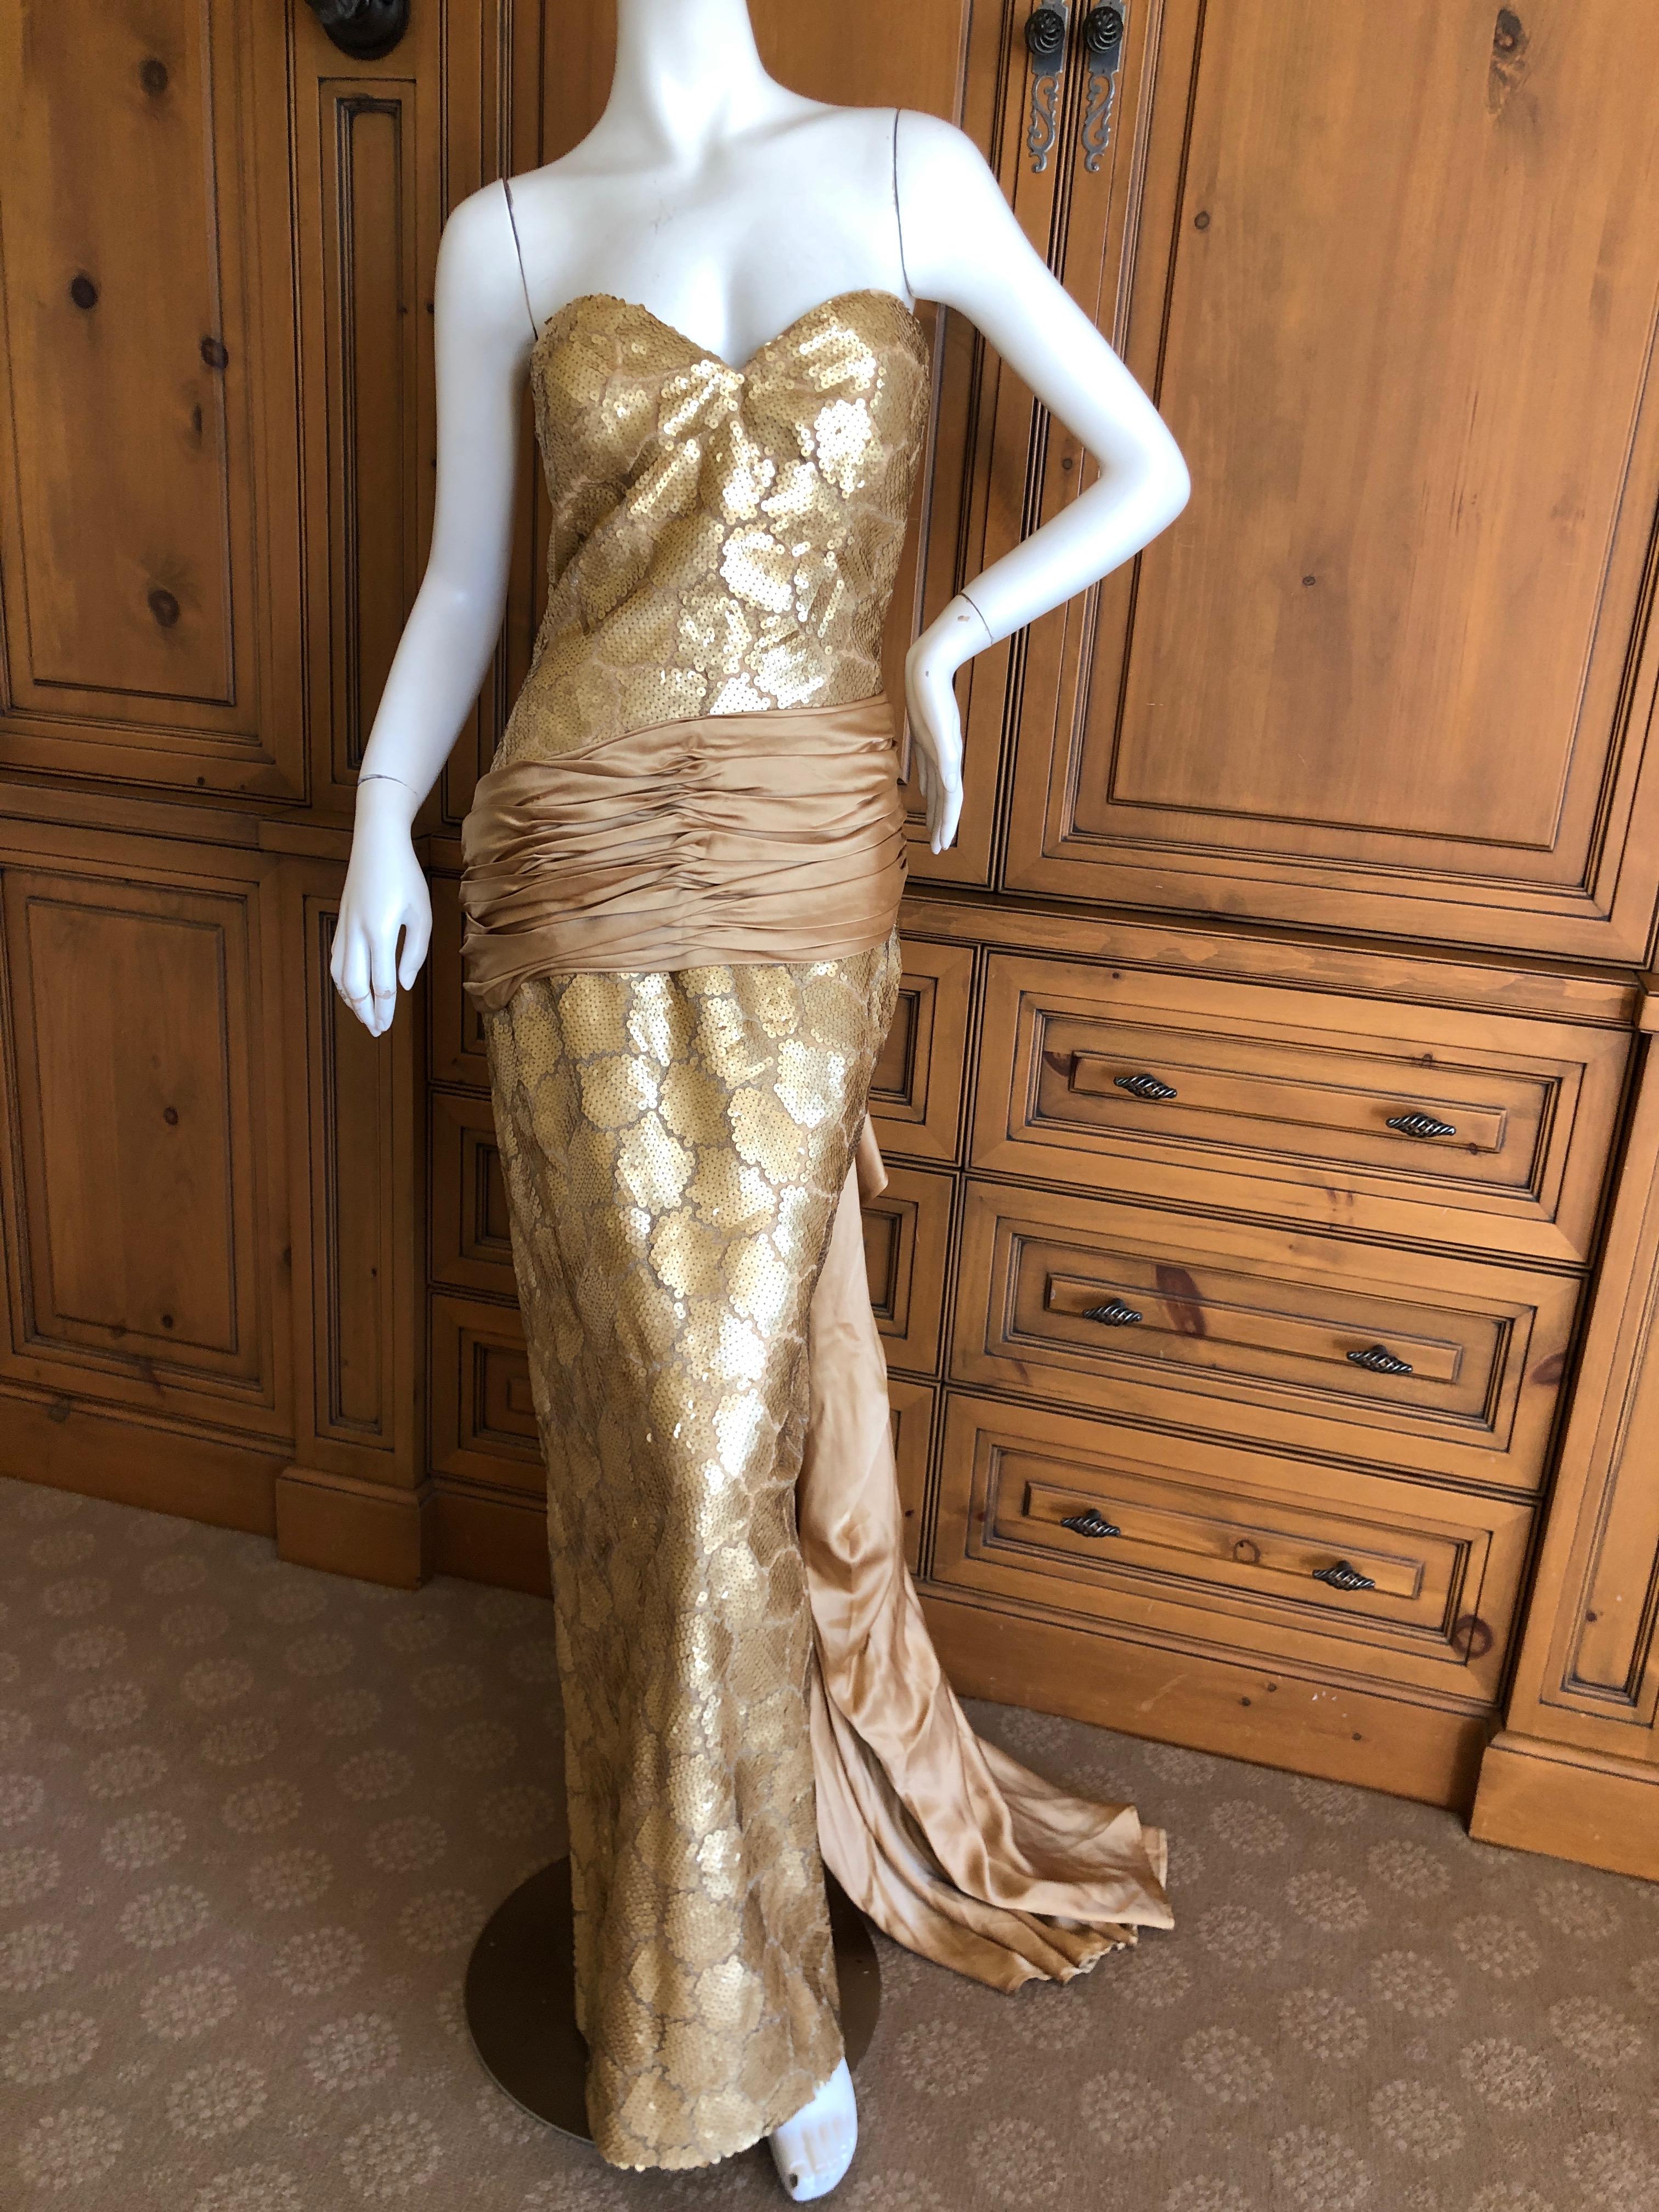 Loris Azzaro Couture 1970s Sequin Accented Gold Dress with Waist Sash Train For Sale 2